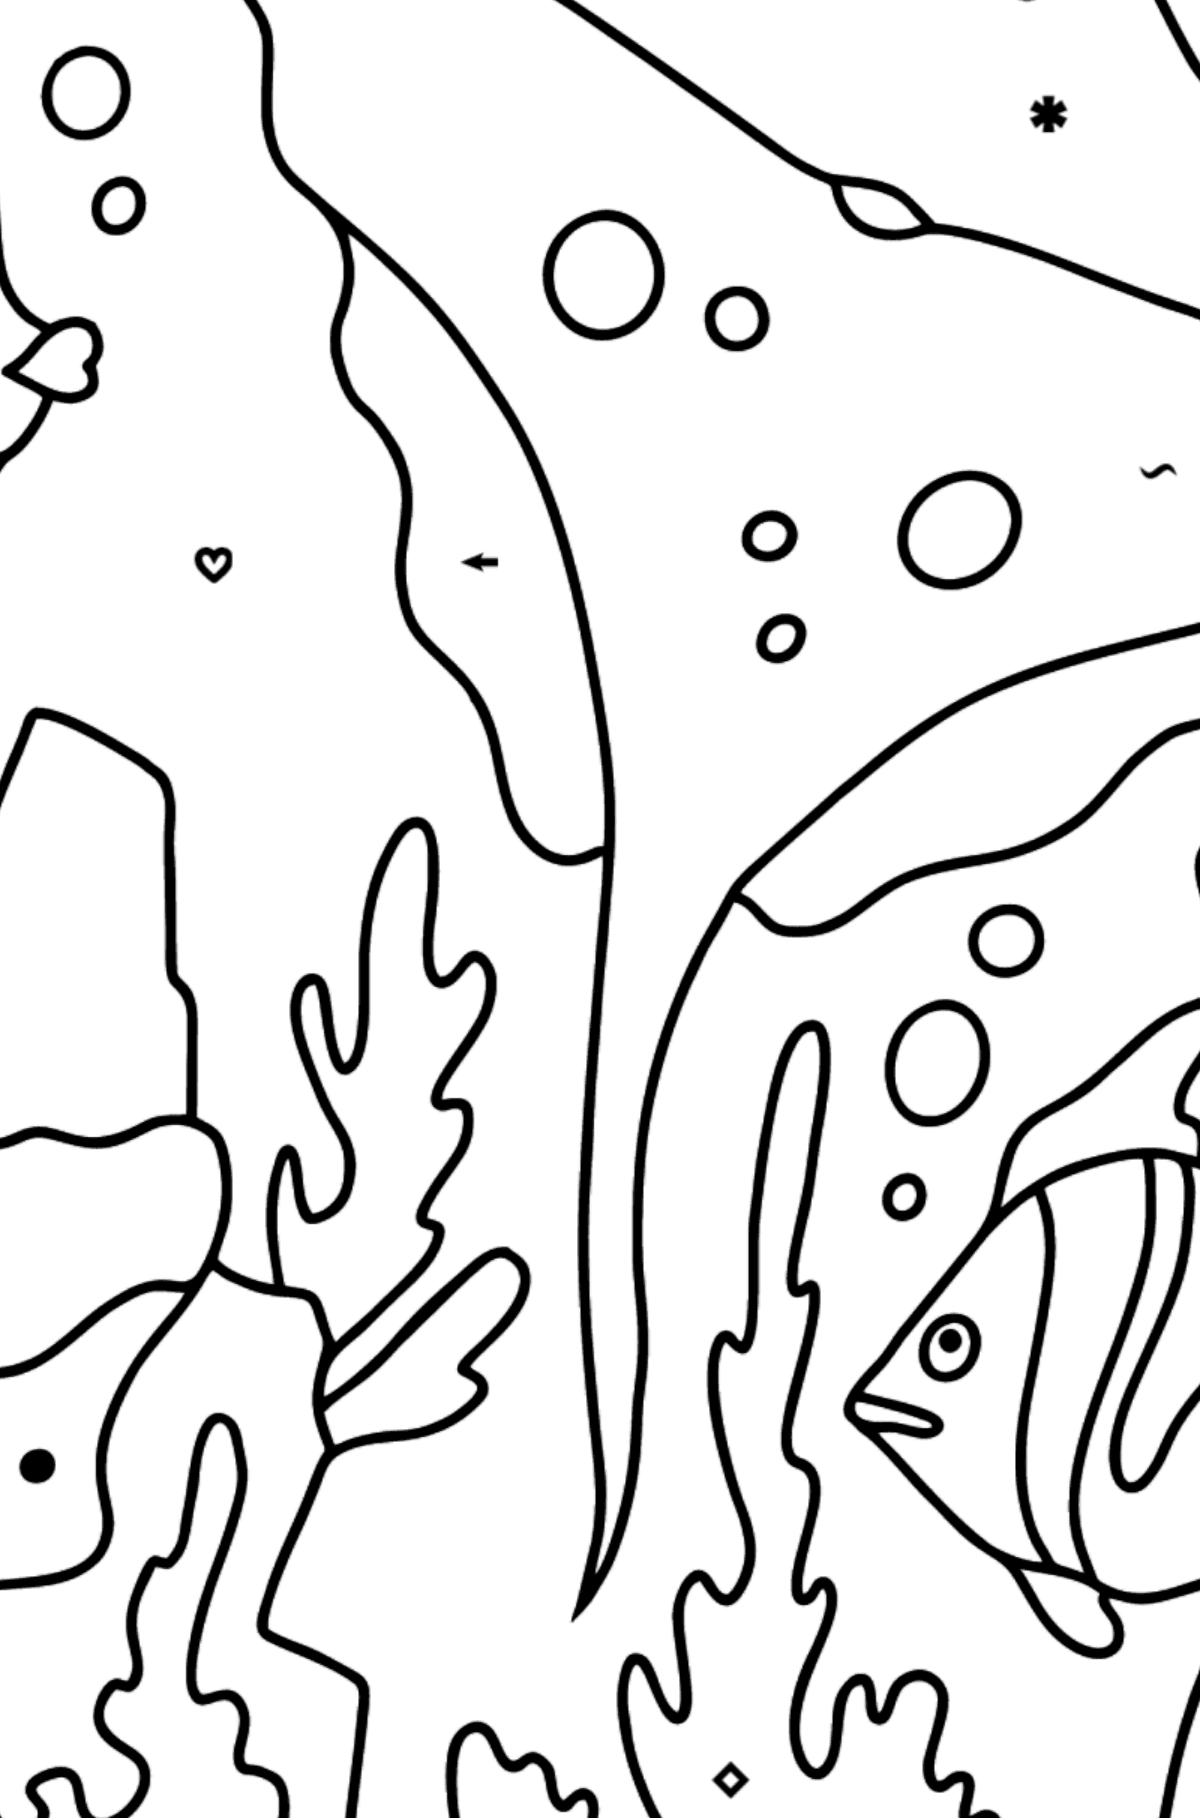 Coloring Page - Fish are Playing with a Charming Stingray - Coloring by Symbols and Geometric Shapes for Kids